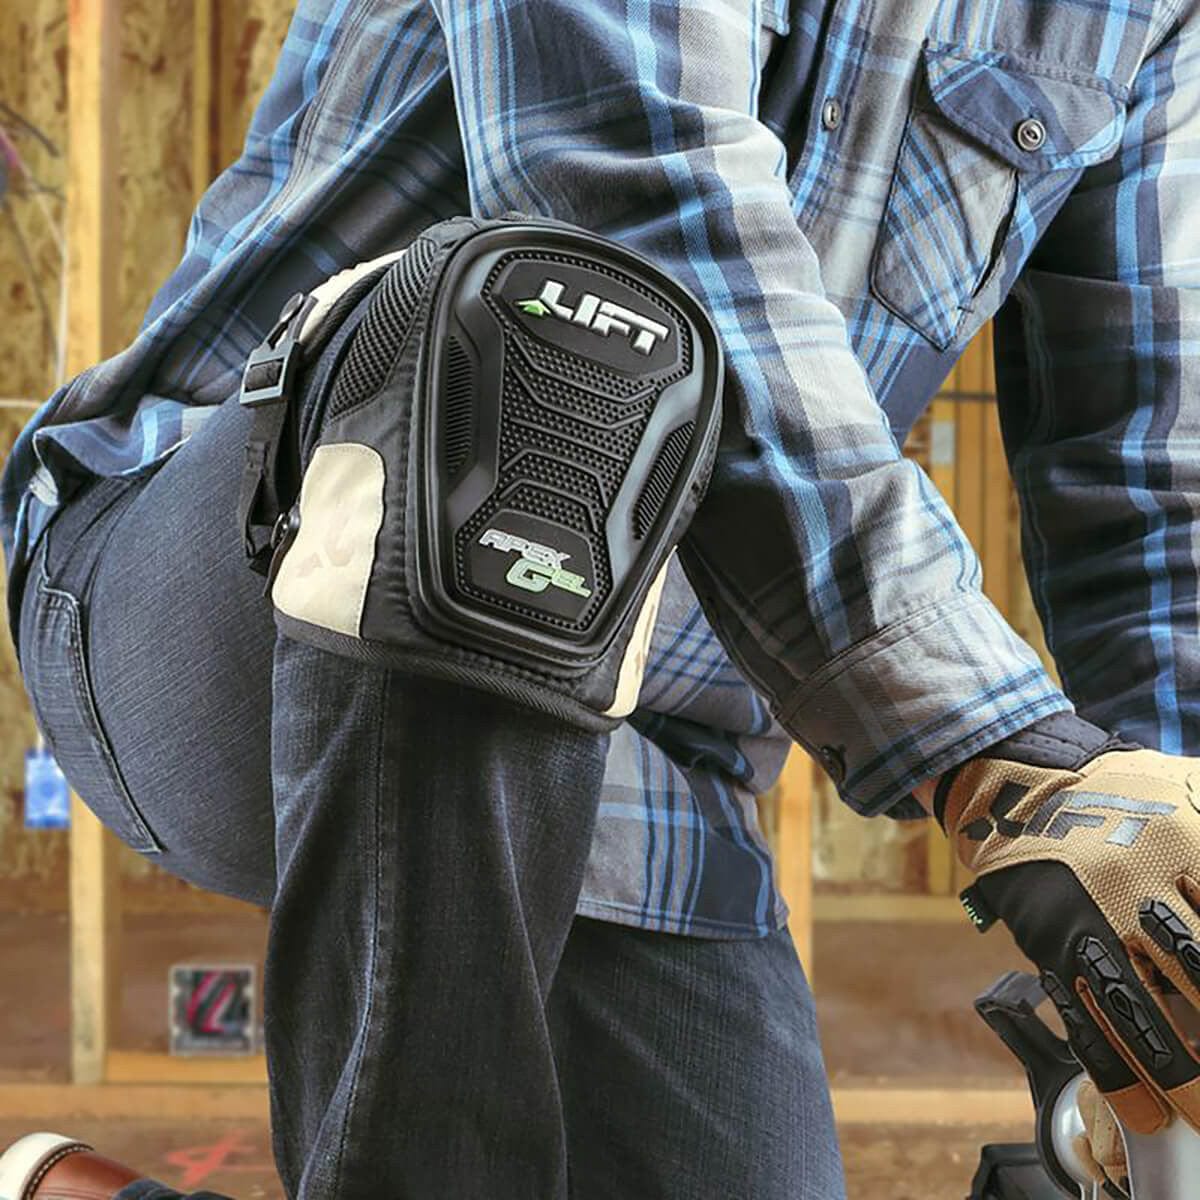 Lift Safety Apex Gel Knee Guard (1-Pair) - In Use